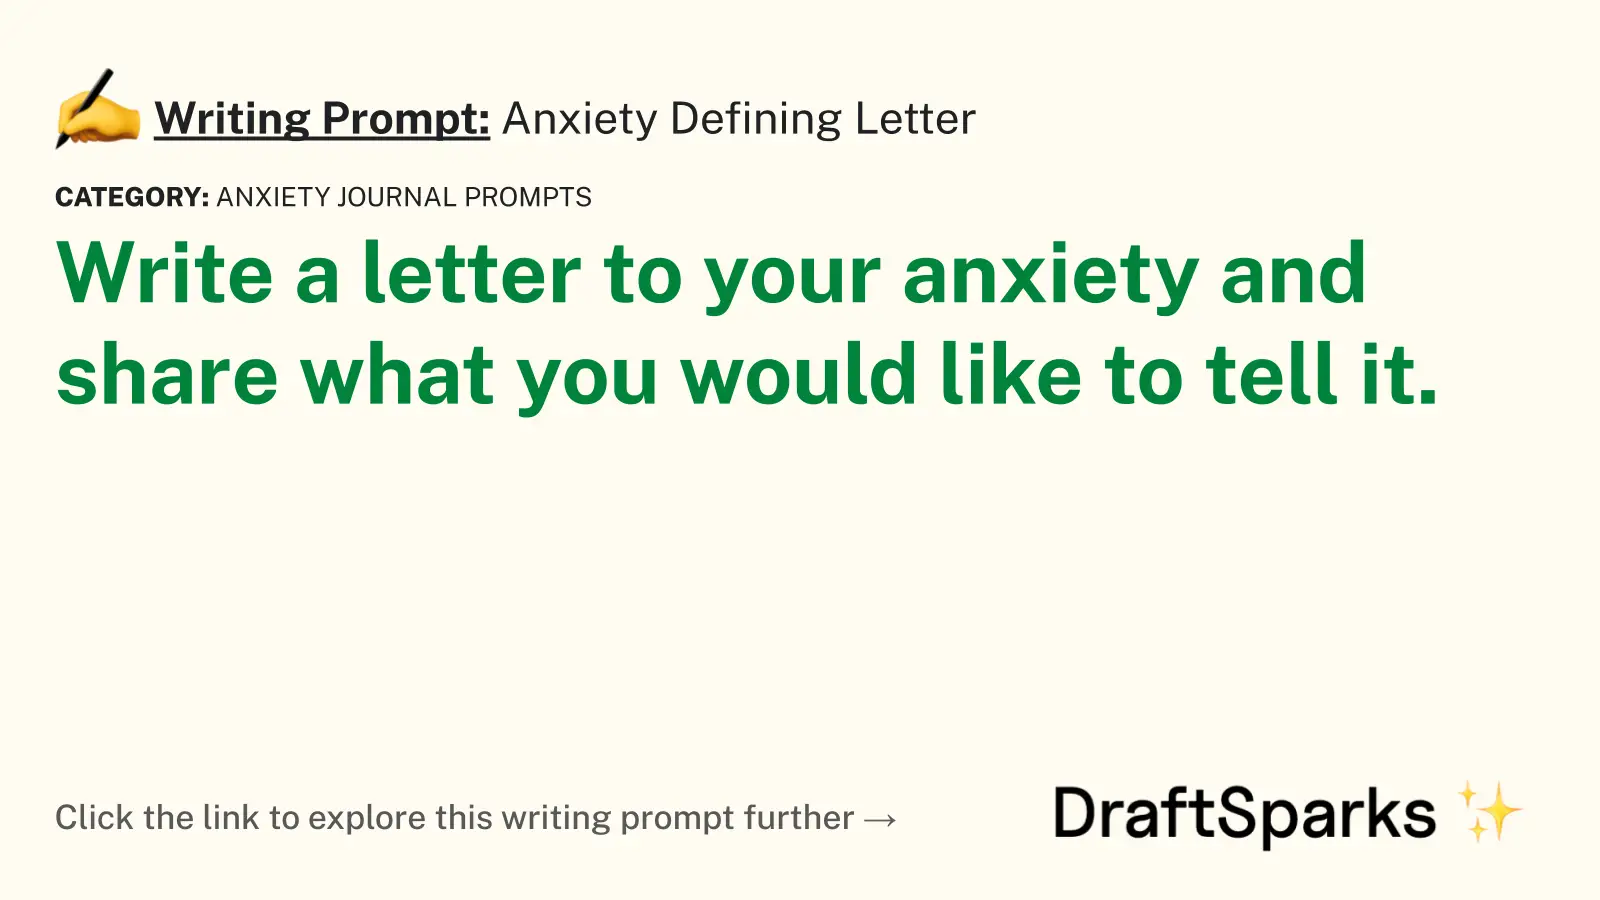 Anxiety Defining Letter